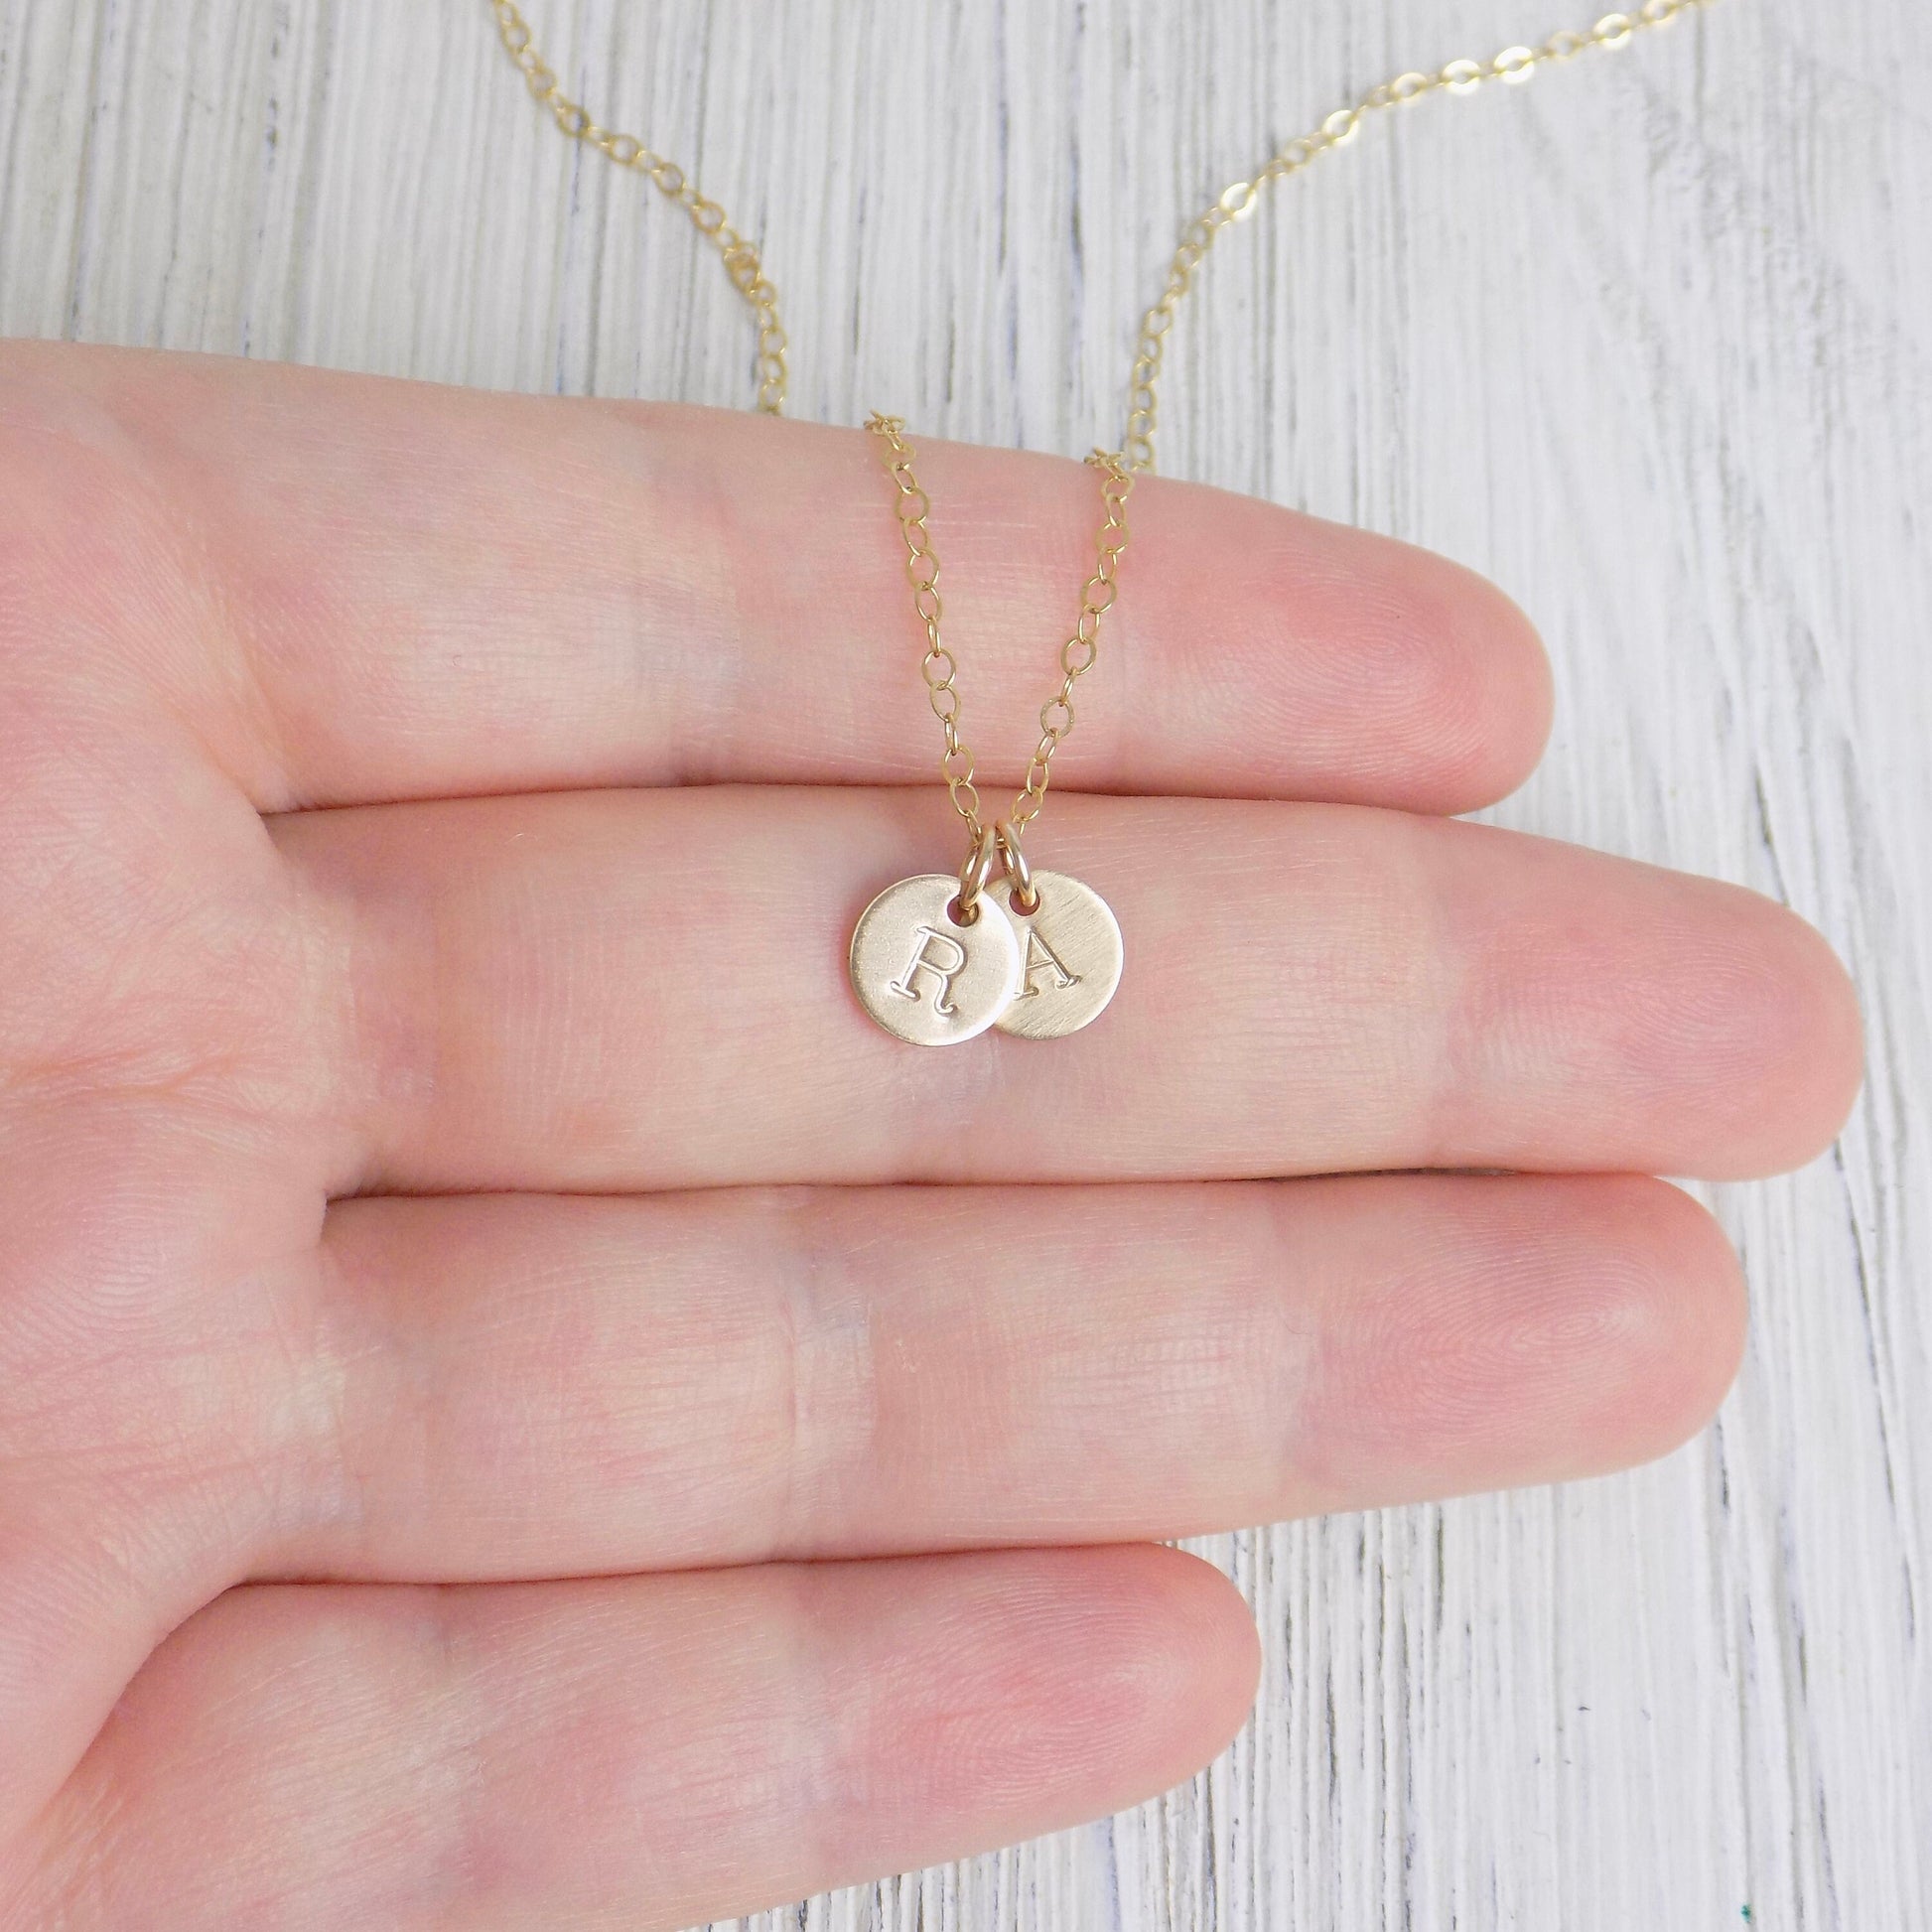 Dainty Initial Charm Necklace - 14K Gold Filled Brushed Matte Satin Finish - Personalized Layering Necklace Gold Coin - Christmas Gift Women